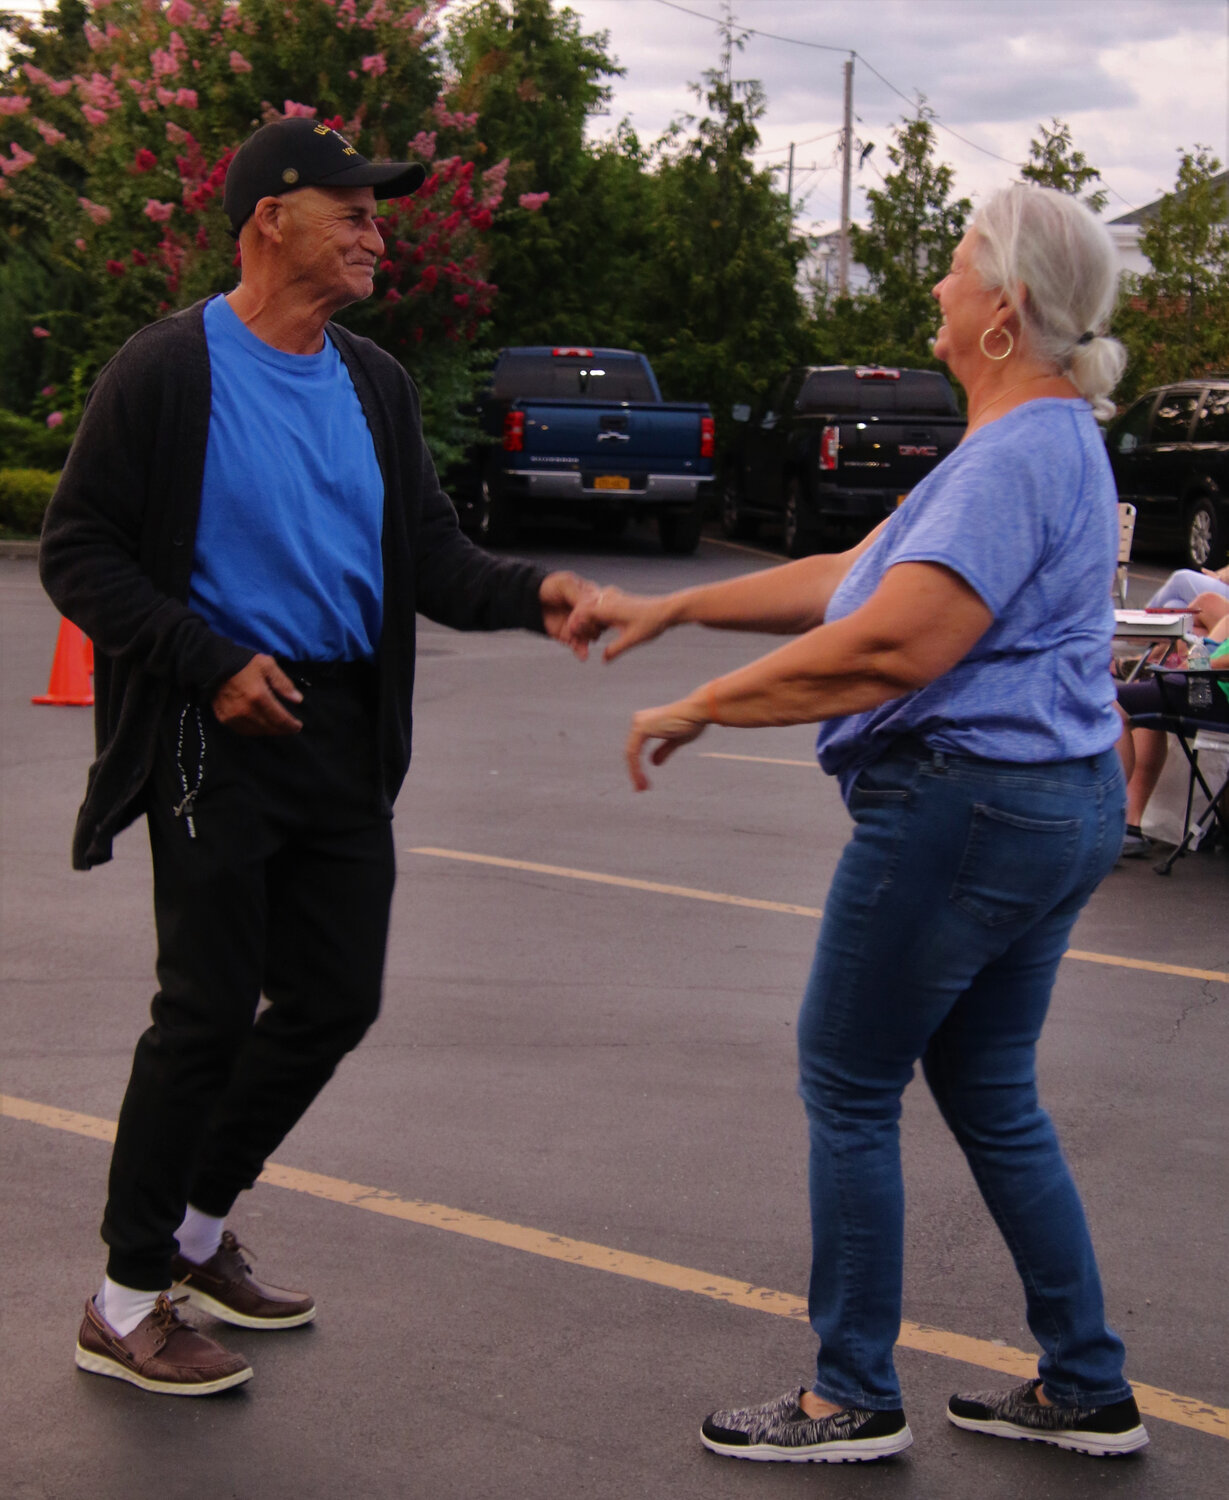 Rene Menendez and Linda Esposito were dancing to the sounds and songs of summer.